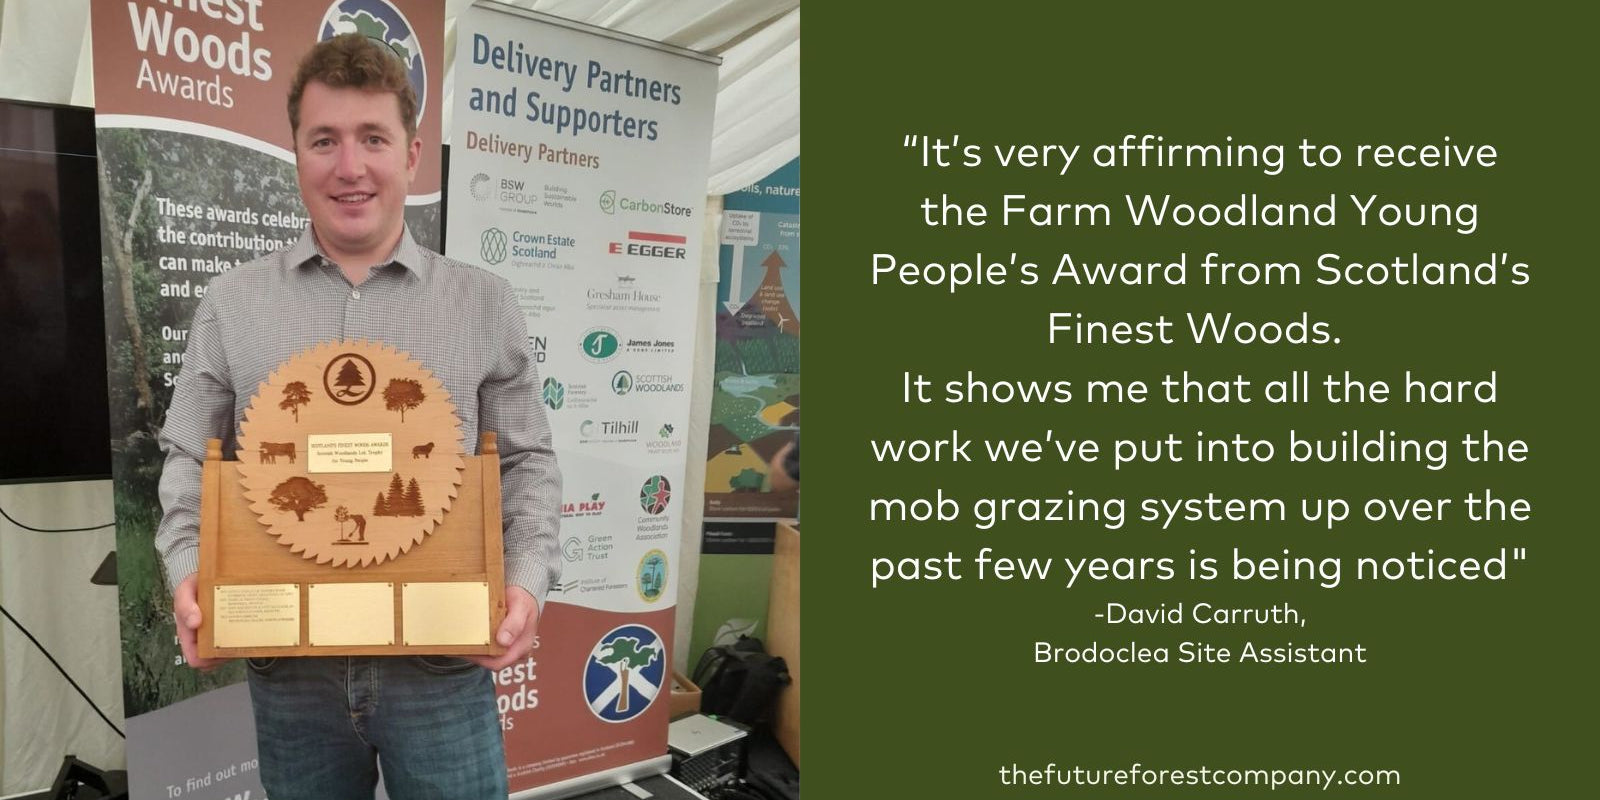 David Carruth wins The Farm Woodland Young People’s Award at Scotland's Finest Woods Awards